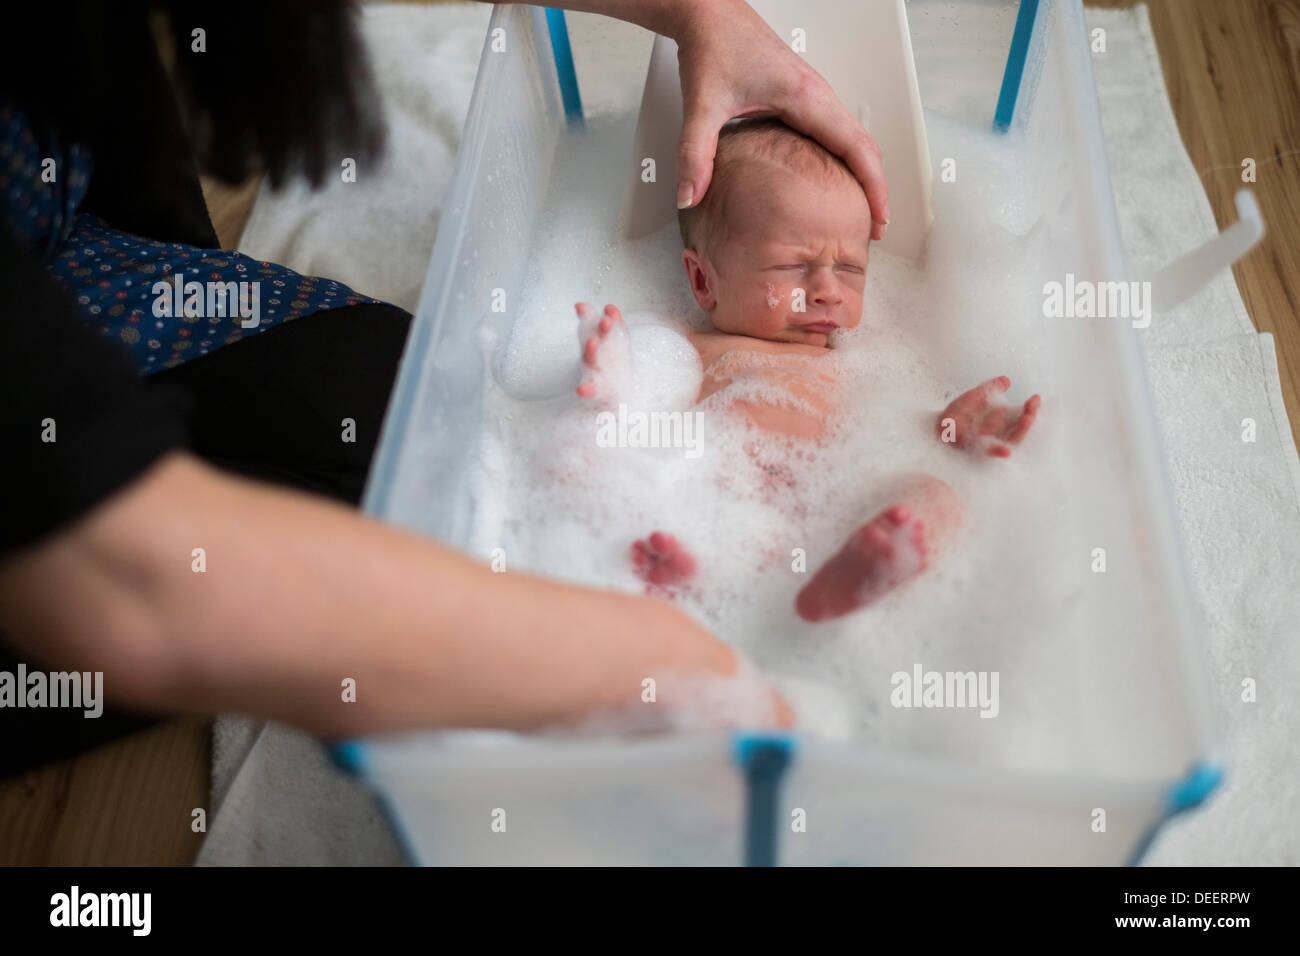 A newborn baby boy getting bathed by his mother. Stock Photo